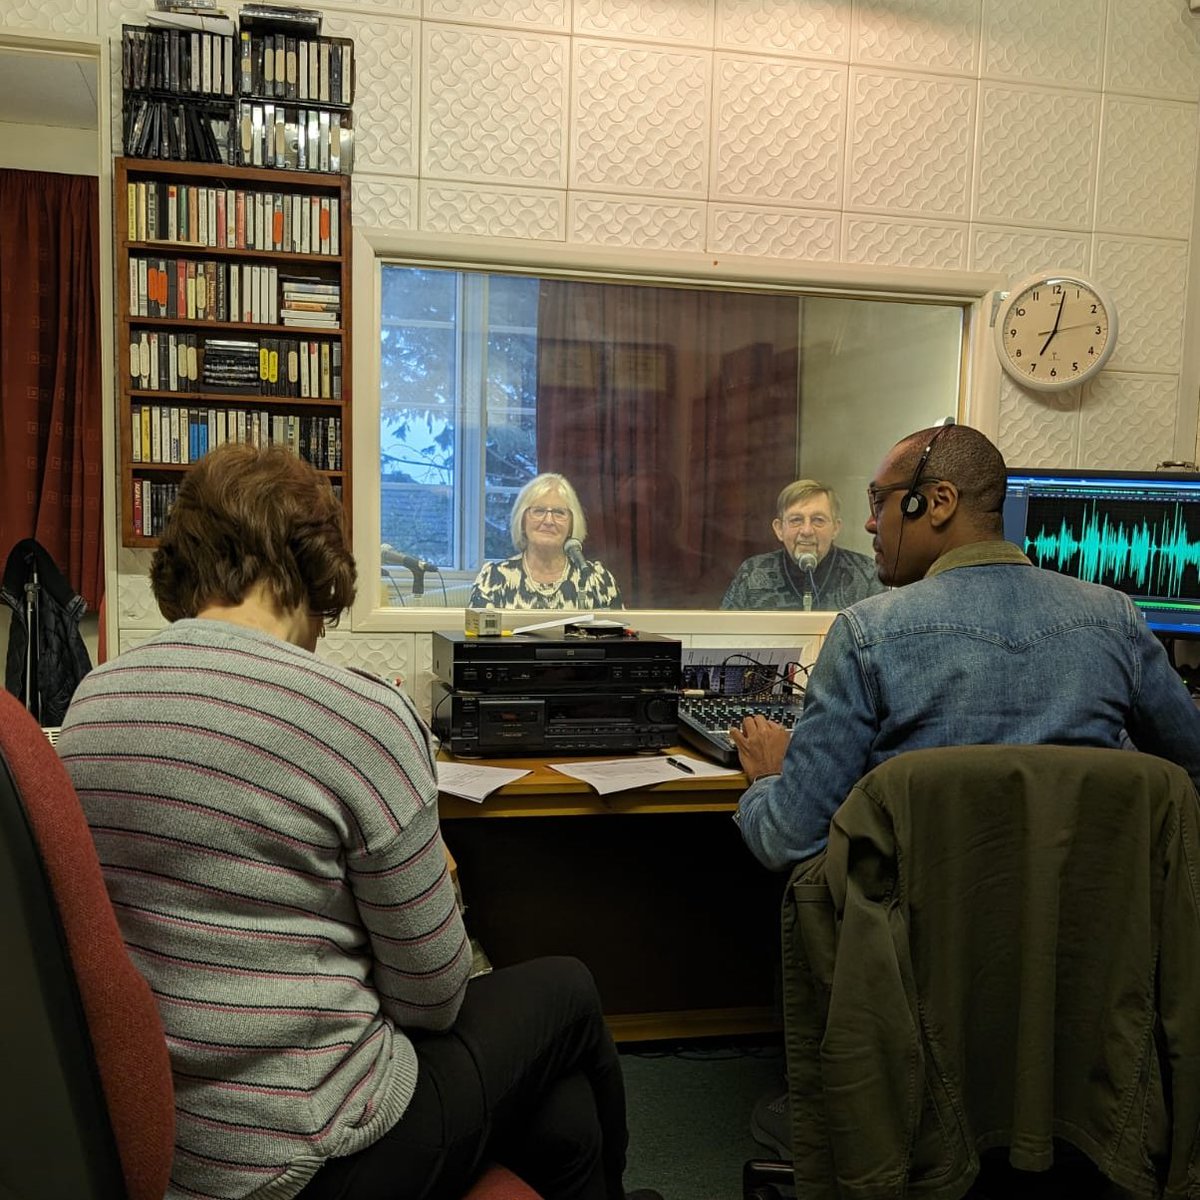 Bromley & District Talking Newspaper Association has been recording & distributing free local news updates for visually impaired residents since 1975. The Mayor joined them recently for their weekly recording, where he shared briefly about his year as Mayor. #ProudOfBromley